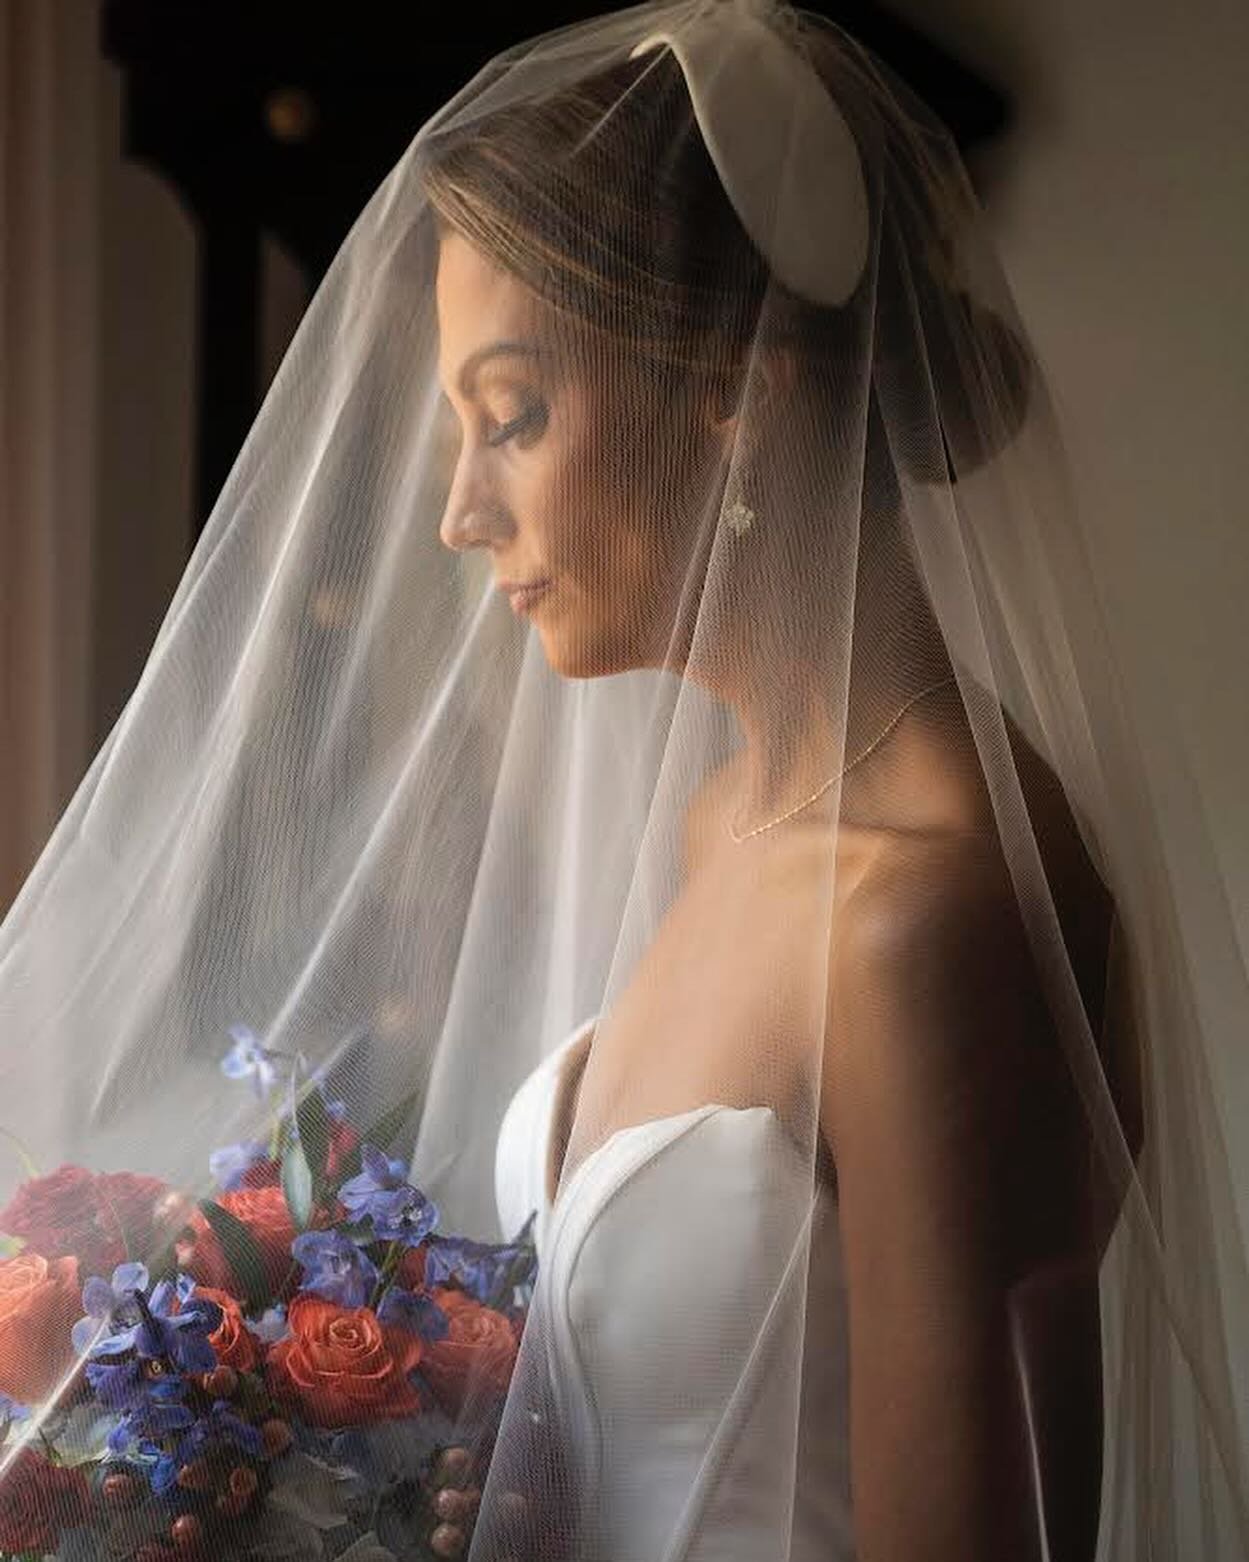 Shannon was inspired by the headpiece style Jennifer Lopez wore for her wedding to Ben Affleck. She wanted a modern, minimalist design with a classic feel to wear with her Maggie Sottero wedding dress. 

We hand-designed the headpiece frame and faced